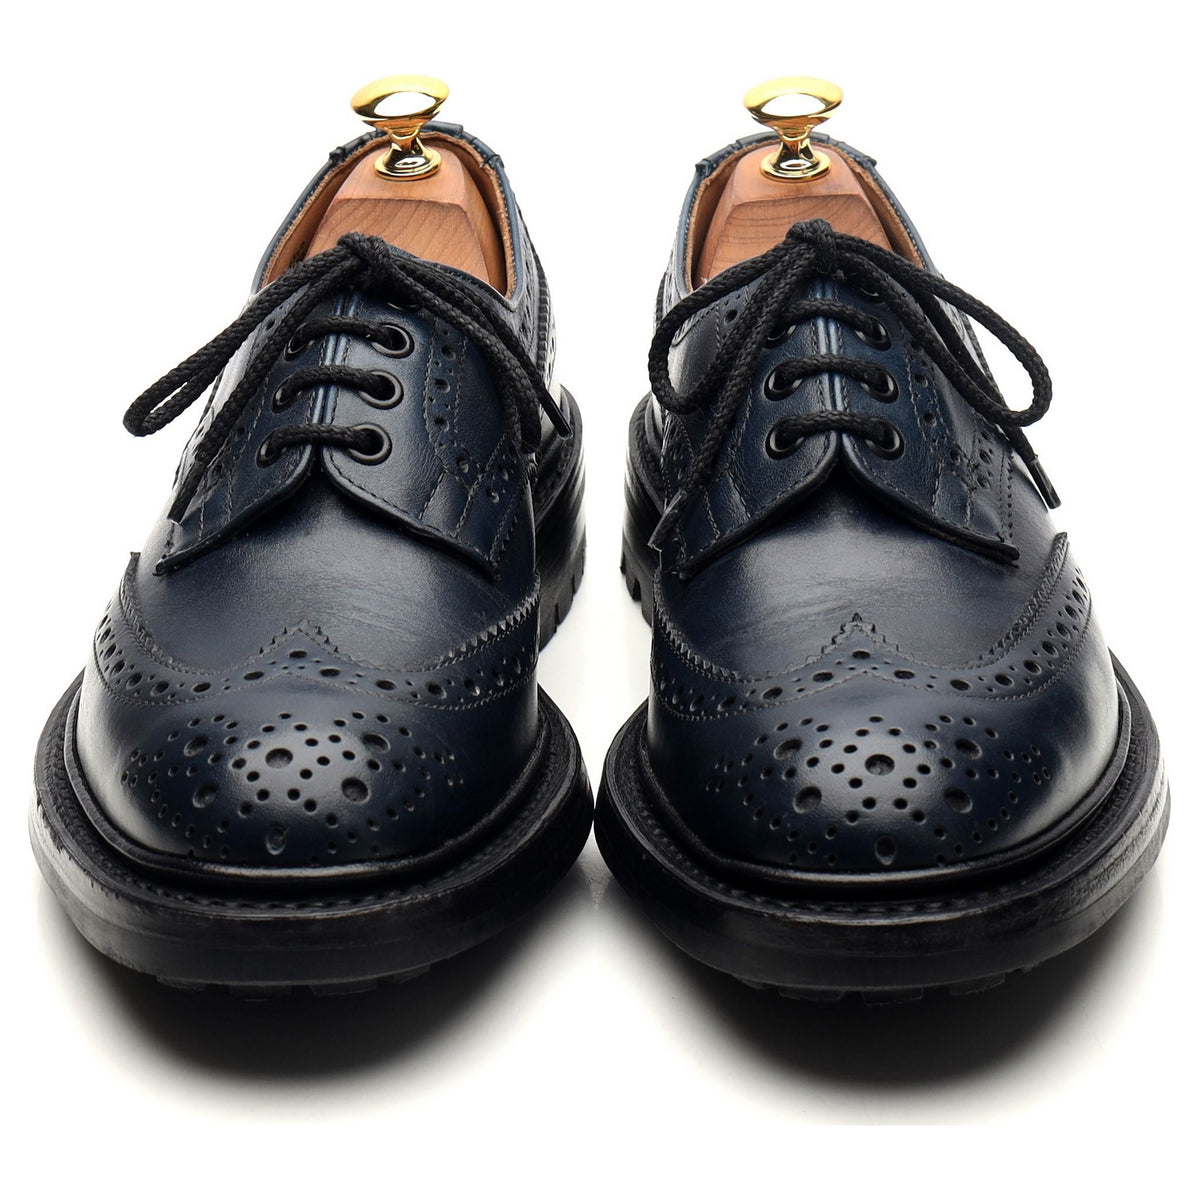 &#39;Bourton&#39; Navy Blue Leather Derby Brogues UK 6